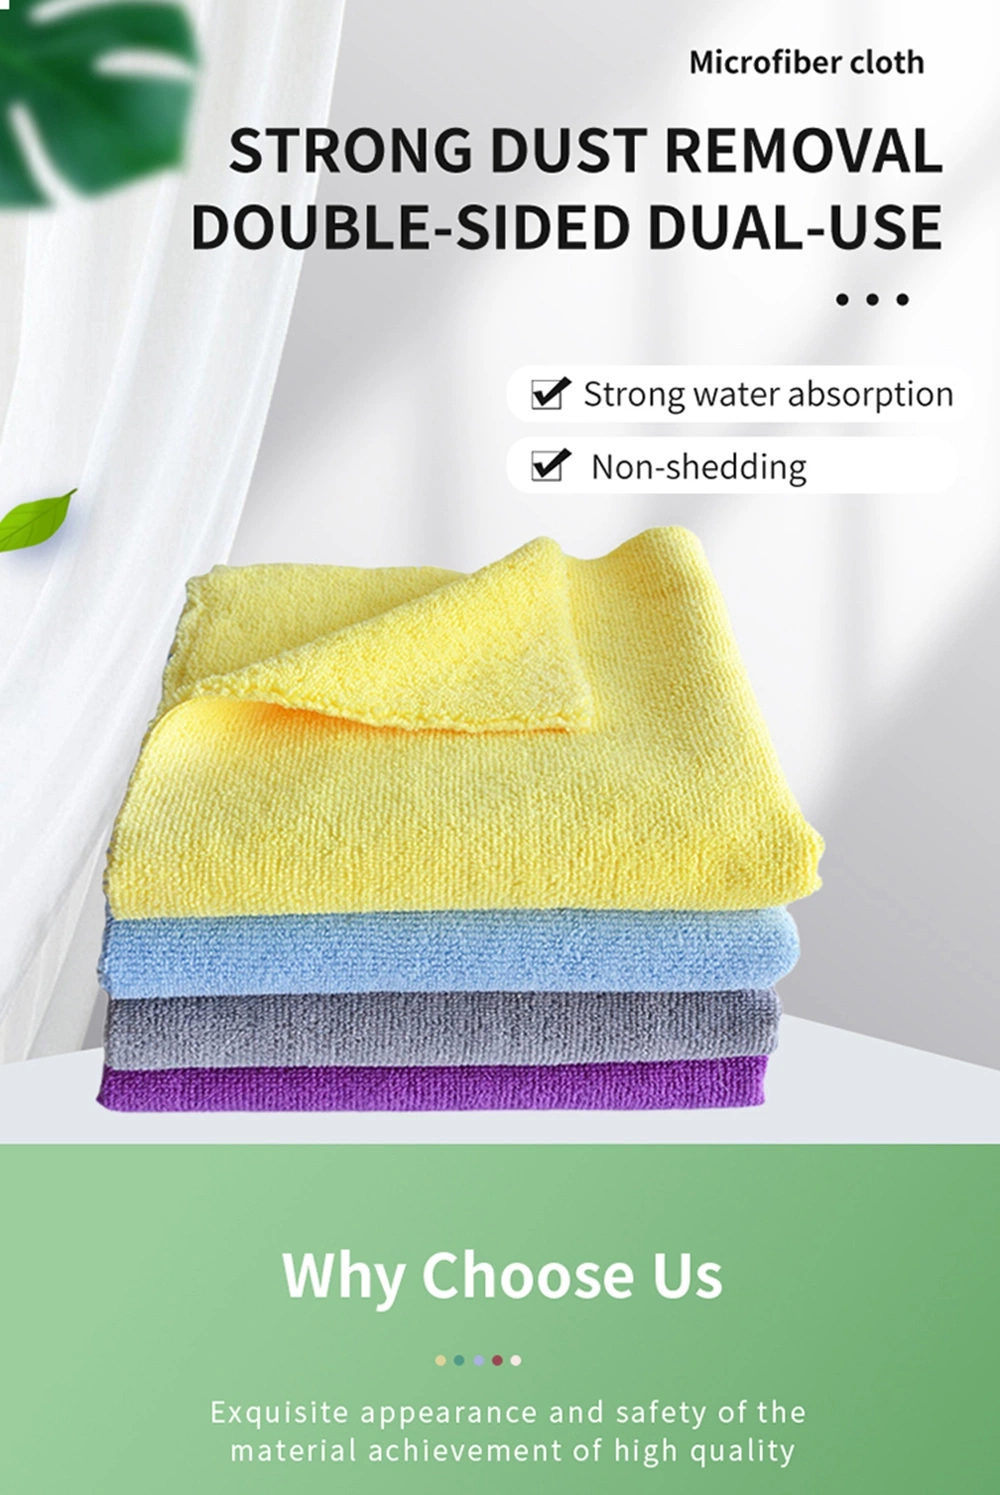 80 Polyester 20 Polyamide Microfibre Car Wash Towel Dish Kitchen Cleaning Cloth Microfiber Towel